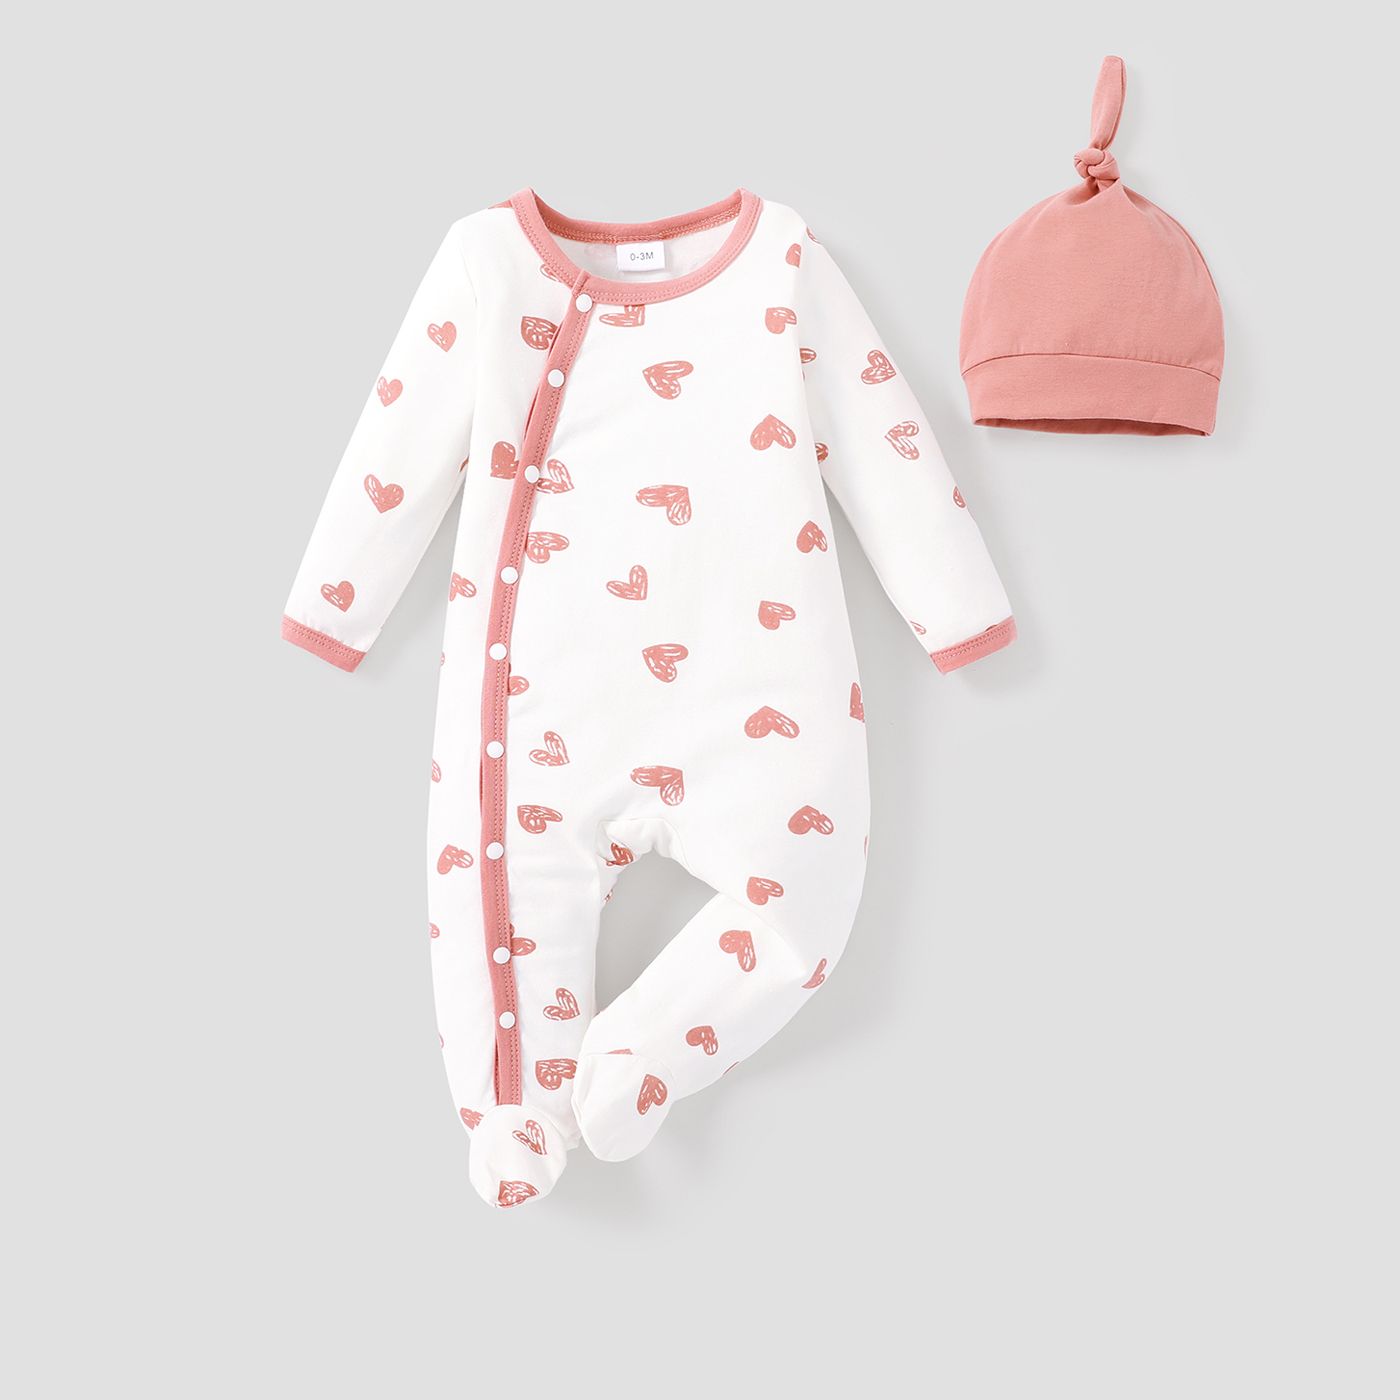 2pcs Baby 95% Cotton Love Heart Print Footed Jumpsuit with Hat Set